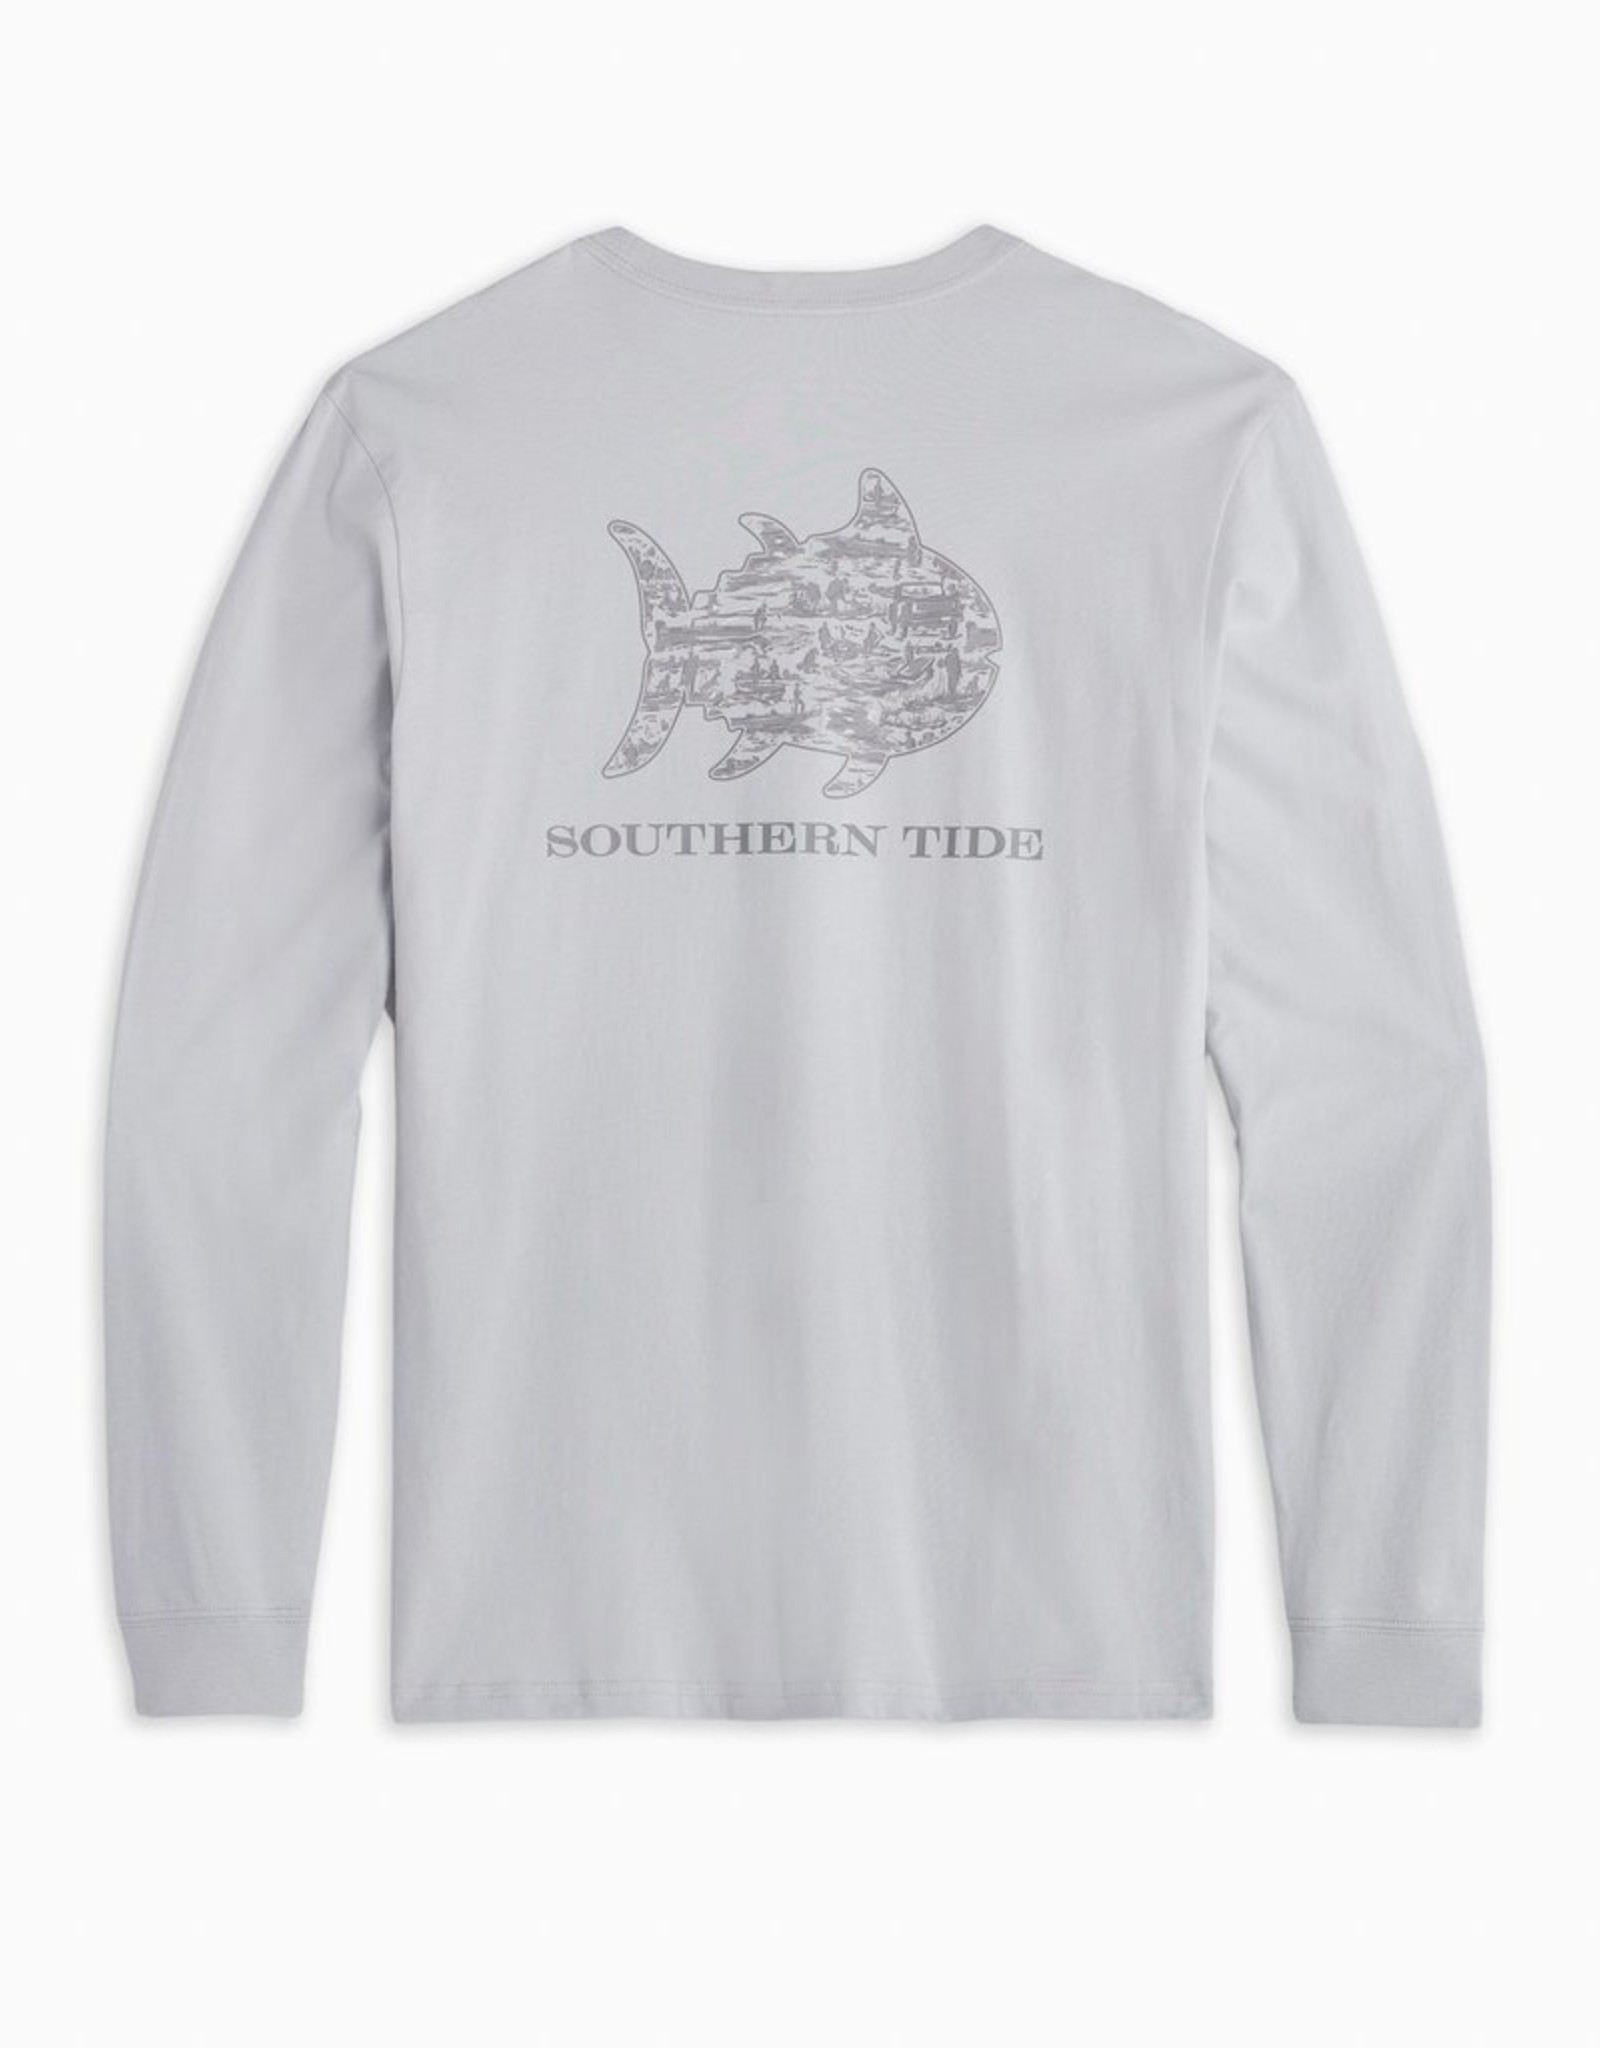 Southern Tide Outdorsman Fill Tee